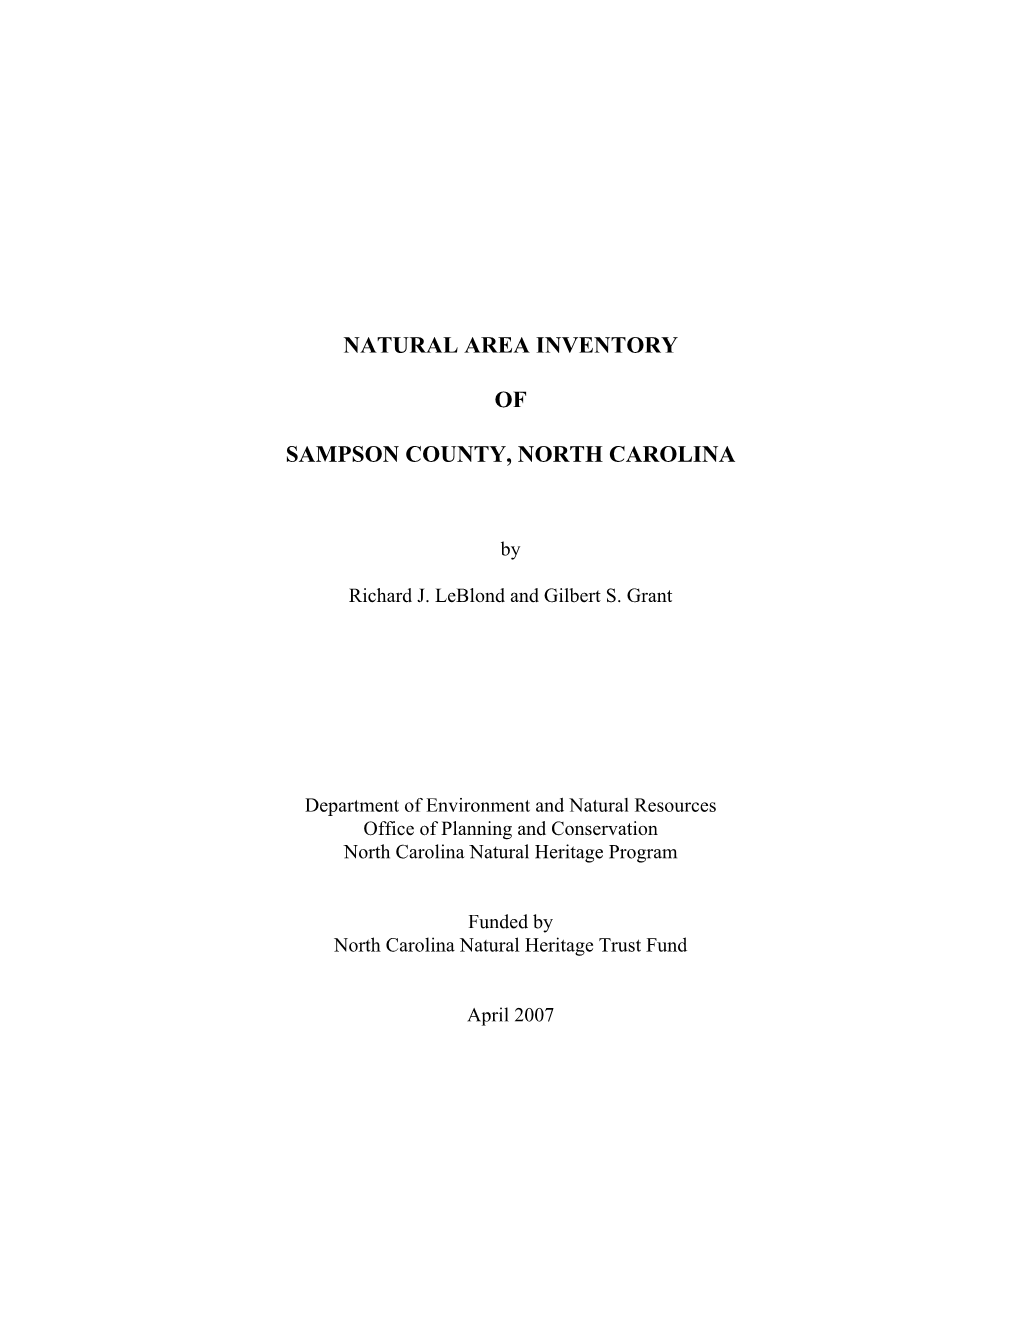 Natural Area Inventory of Sampson County, North